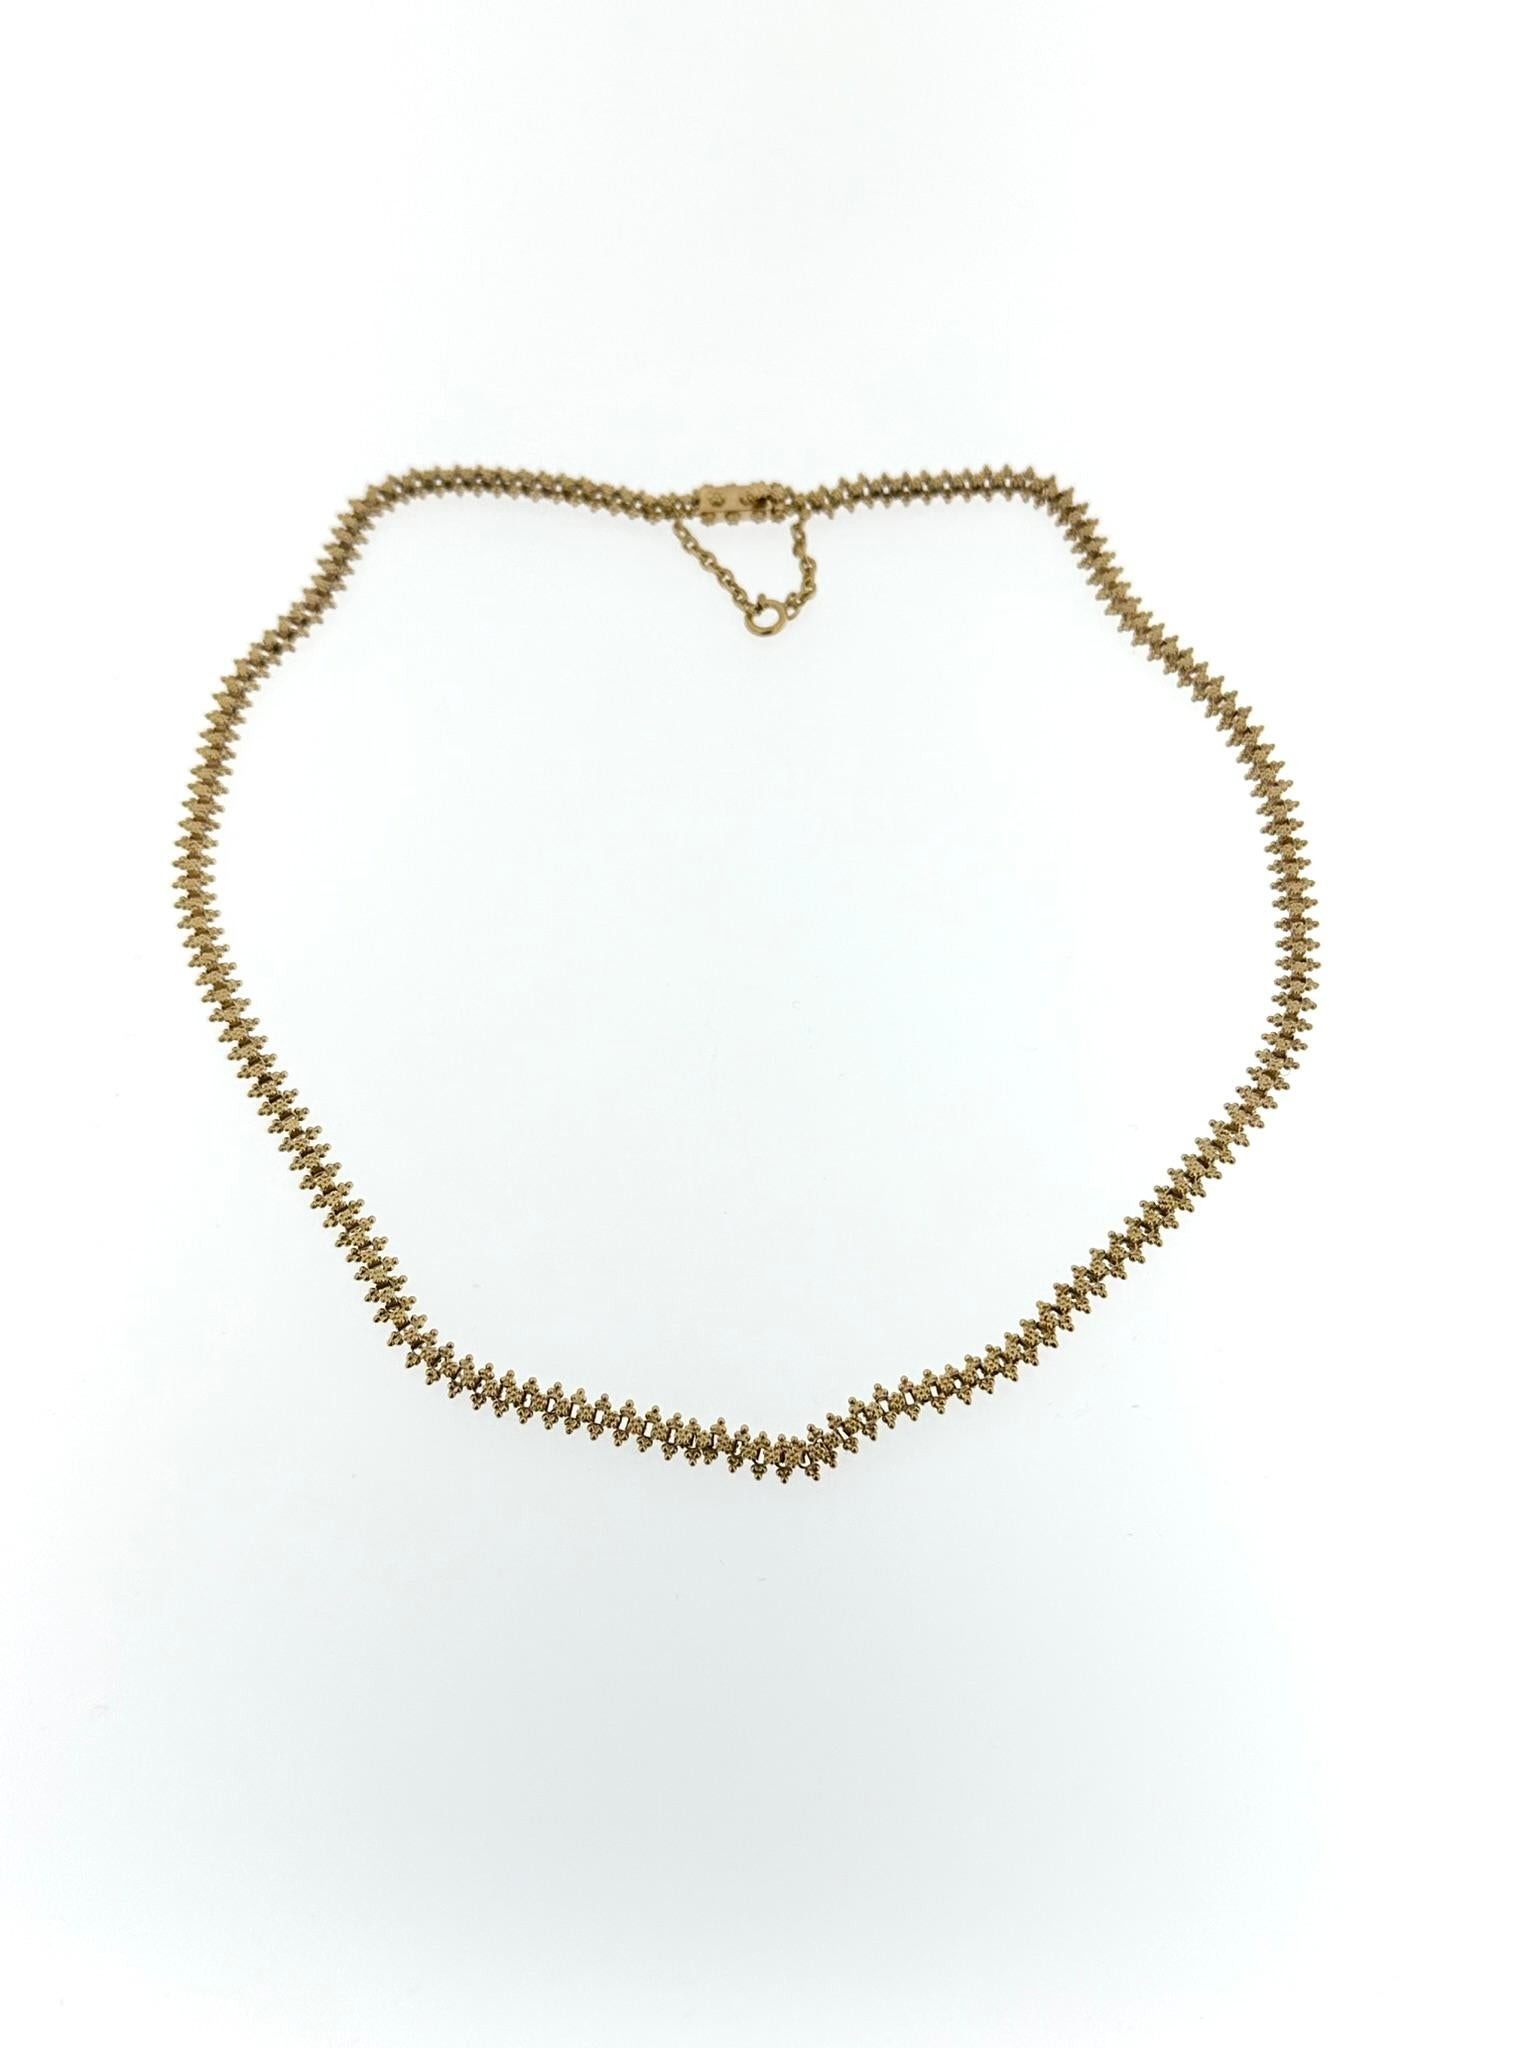 The Vintage Hand-Crafted Portuguese Necklace is a testament to the artistry and heritage of Portuguese jewelry making. Crafted from 19kt yellow gold, this necklace showcases traditional techniques and intricate detailing that reflect the rich